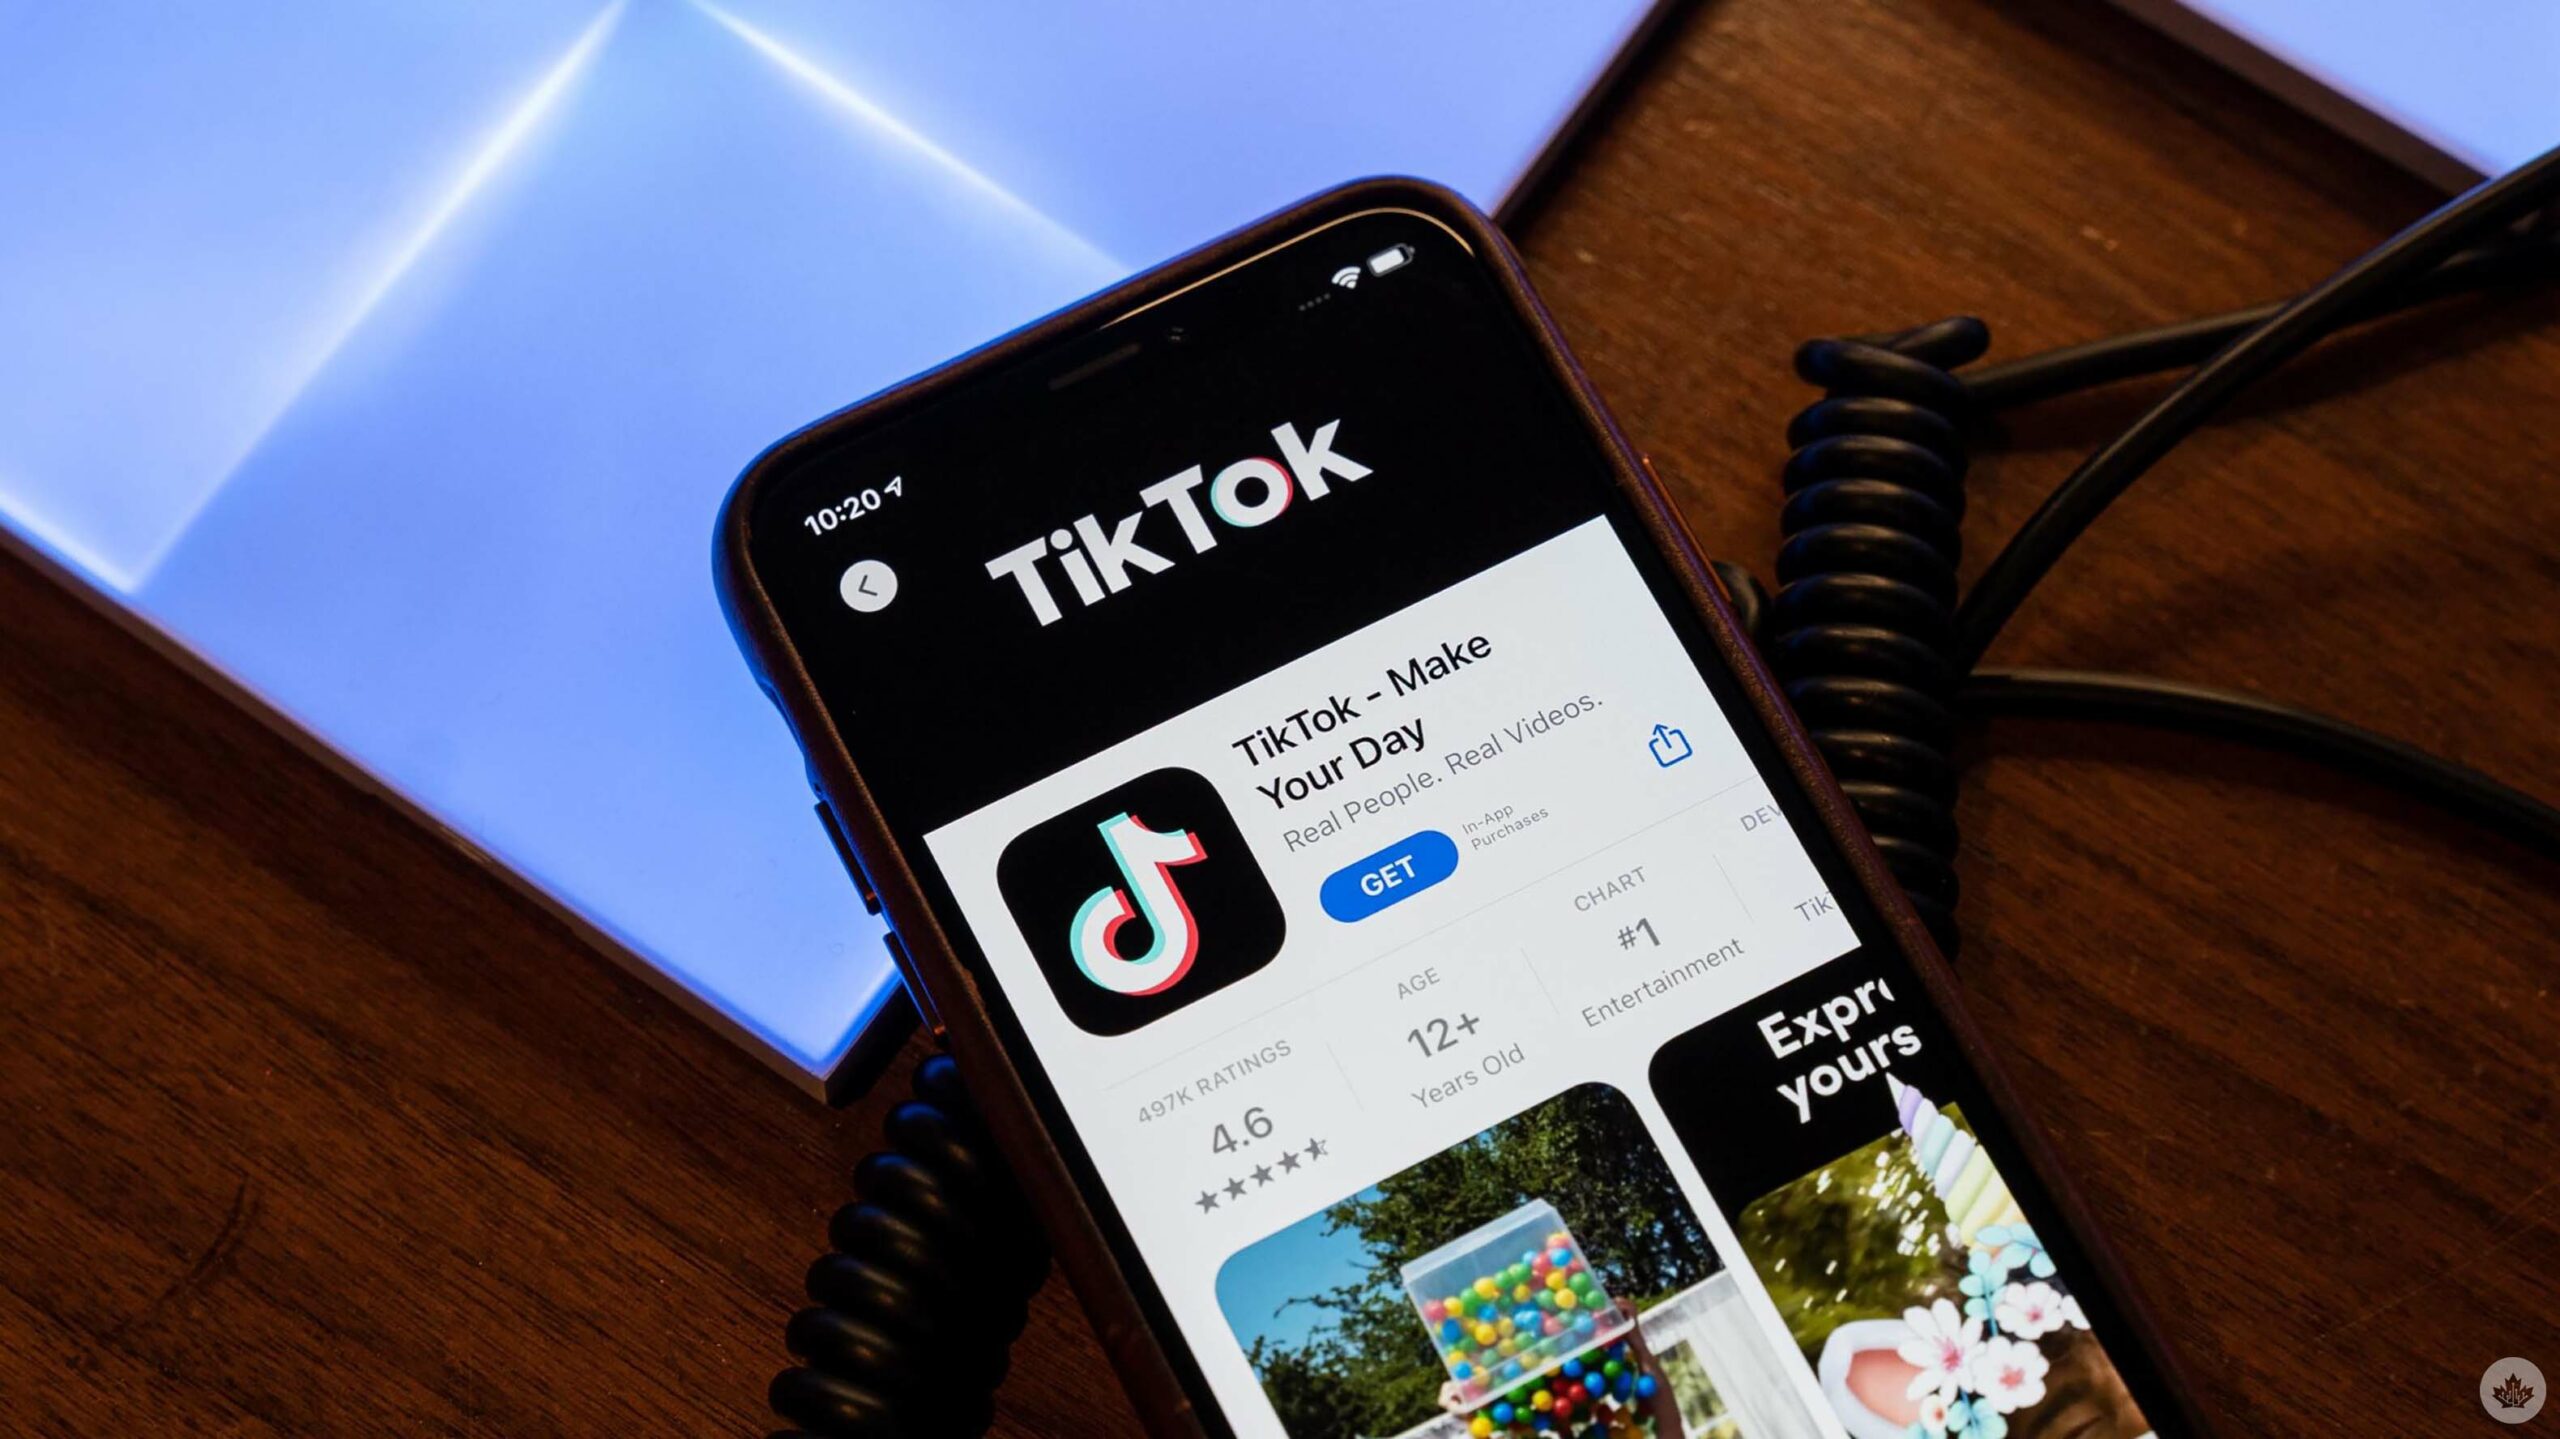 TikTok’s new update will only let teens access 60 minutes of screen time a day